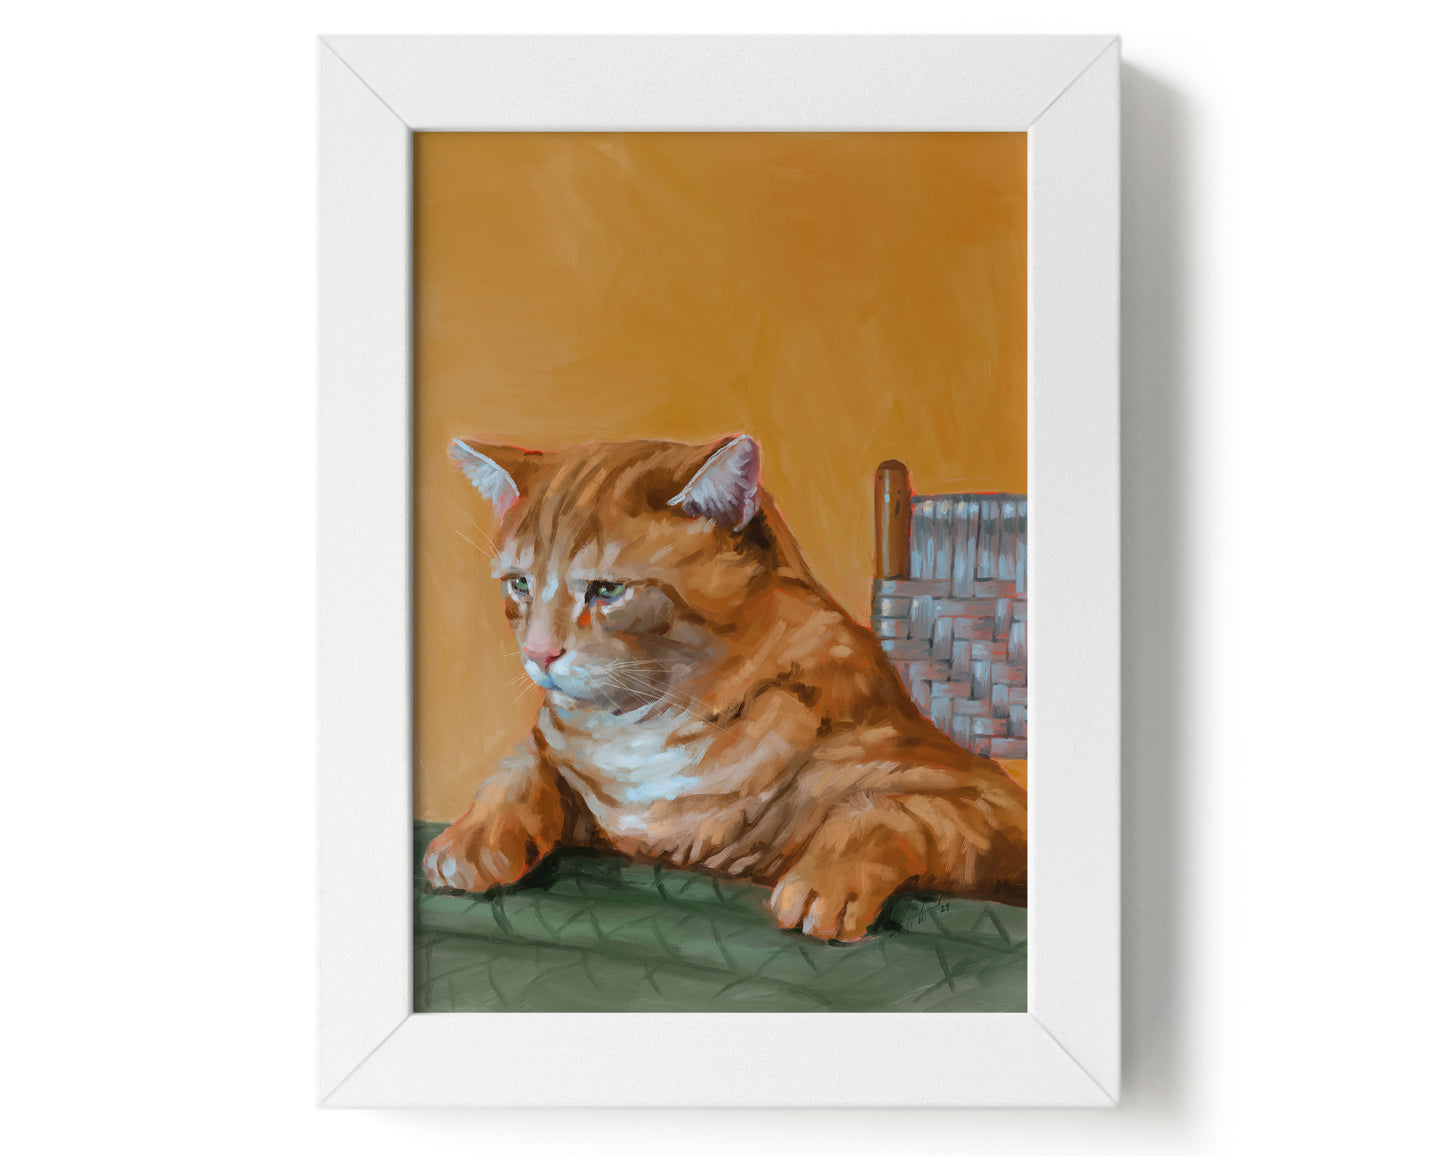 "Patapon" by Catherine Hébert - Orange Tabby Cat At The Dinner Table Art Print - 5"x7" size